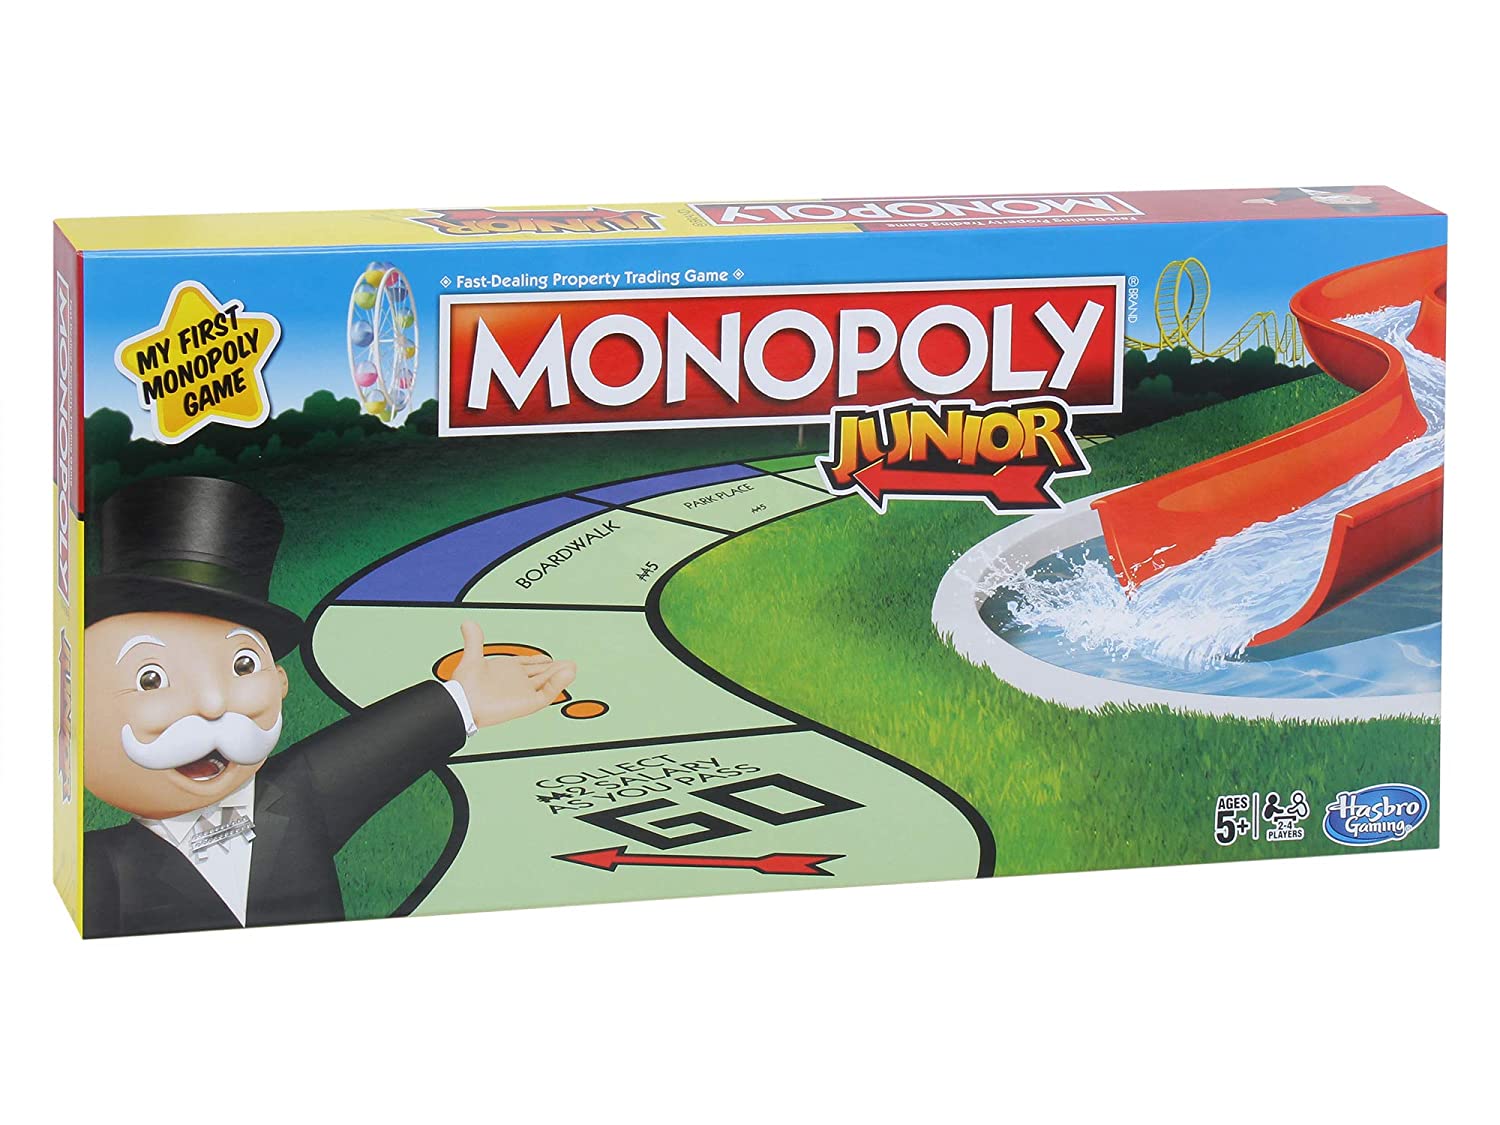 Monopoly Junior - Cityscape of Monopoly Game town - SND